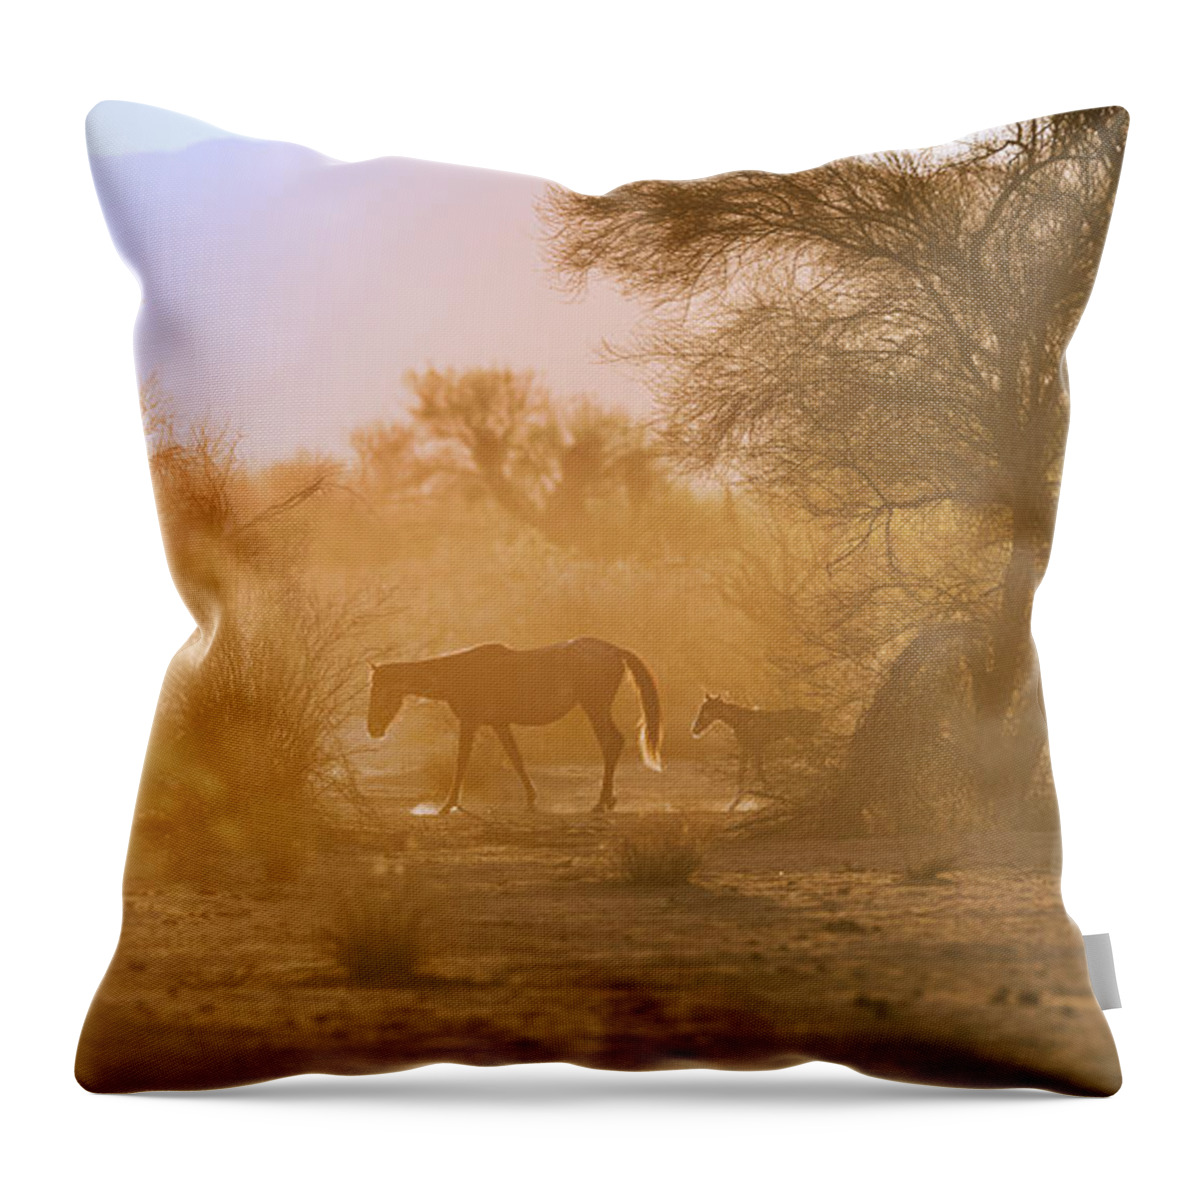 Cute Throw Pillow featuring the photograph Sunrise Walk by Shannon Hastings